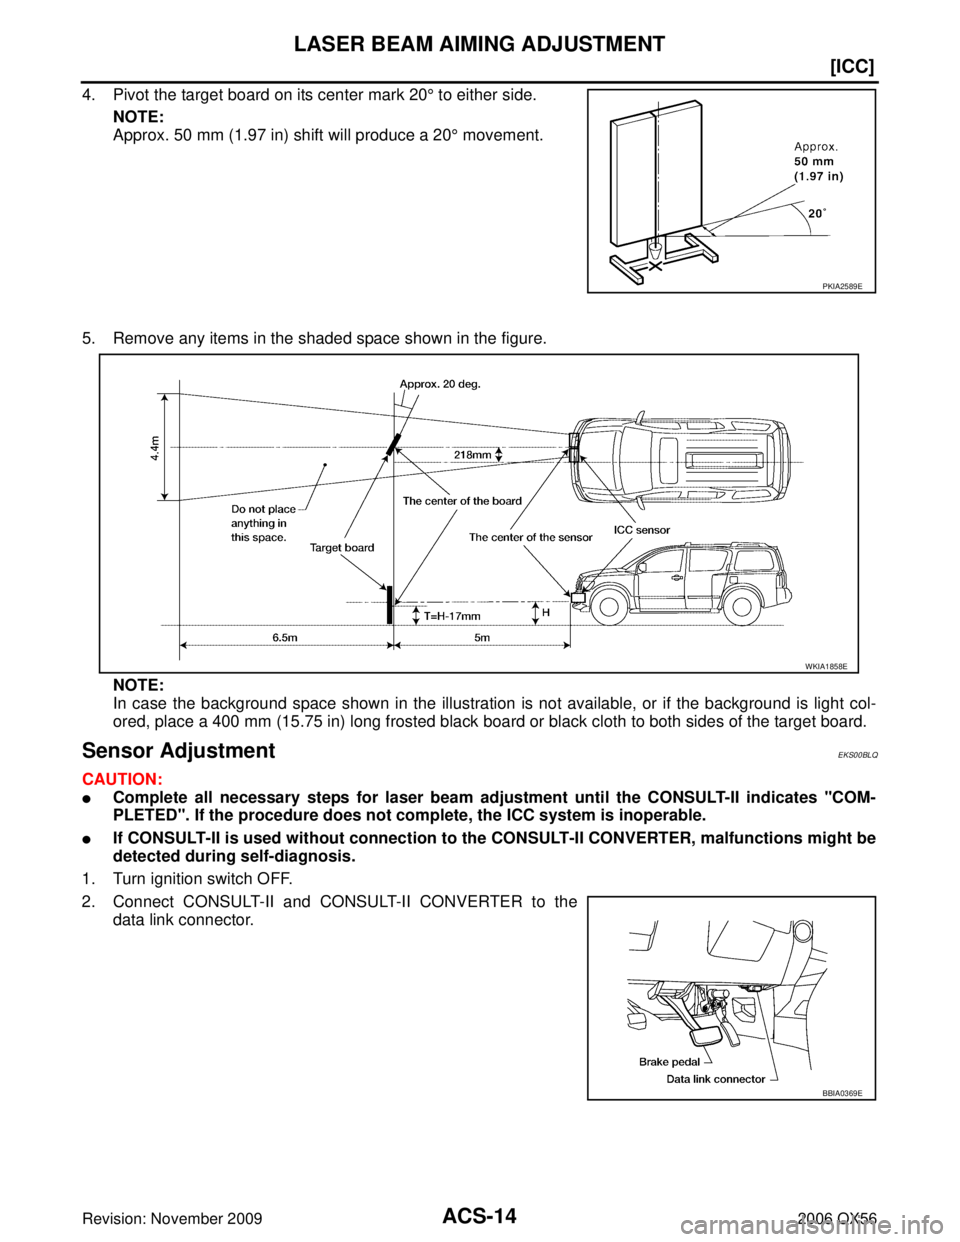 INFINITI QX56 2006  Factory Service Manual ACS-14
[ICC]
LASER BEAM AIMING ADJUSTMENT
Revision: November 20092006 QX56
4. Pivot the target board on its center mark 20° to either side.
NOTE:
Approx. 50 mm (1.97 in) shift will produce a 20 ° mo